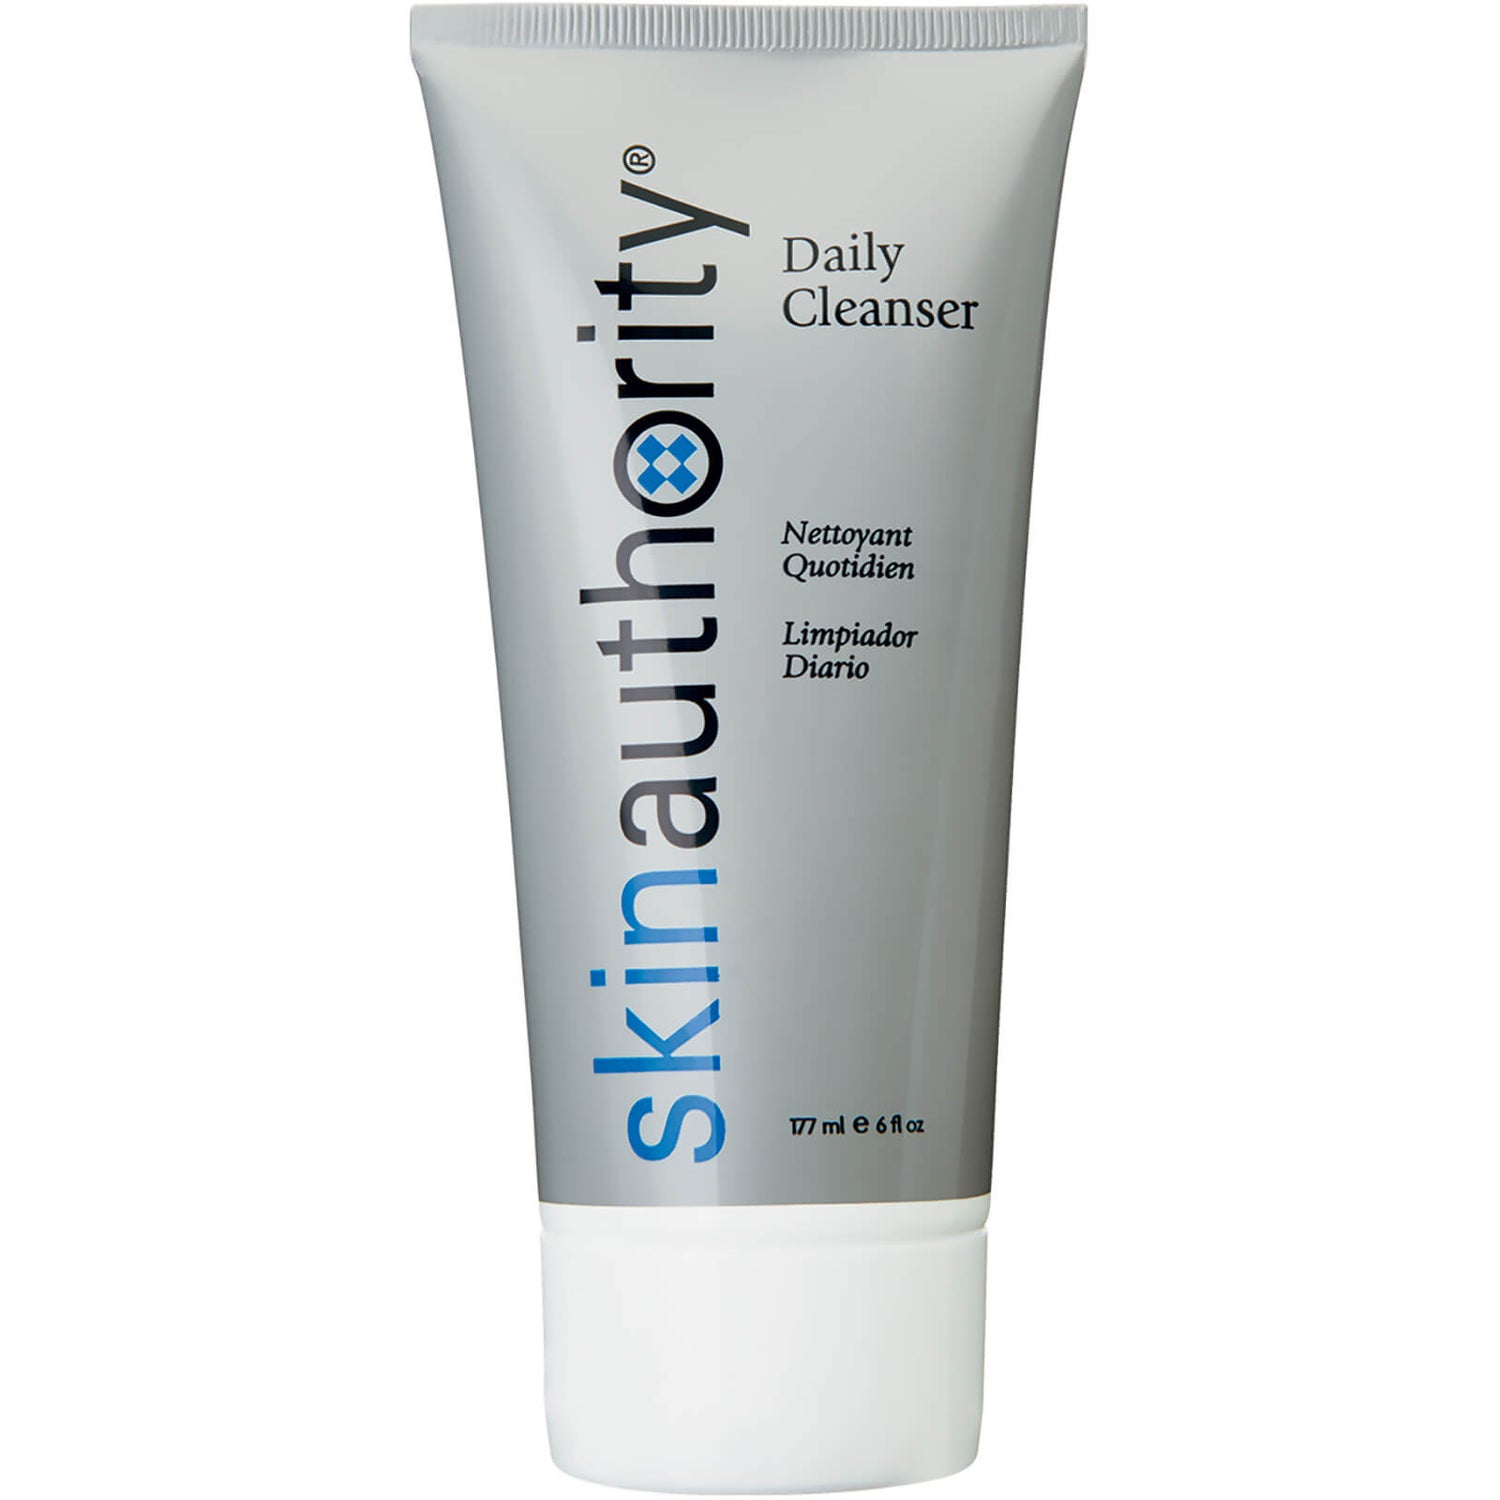 Skin Authority Daily Cleanser